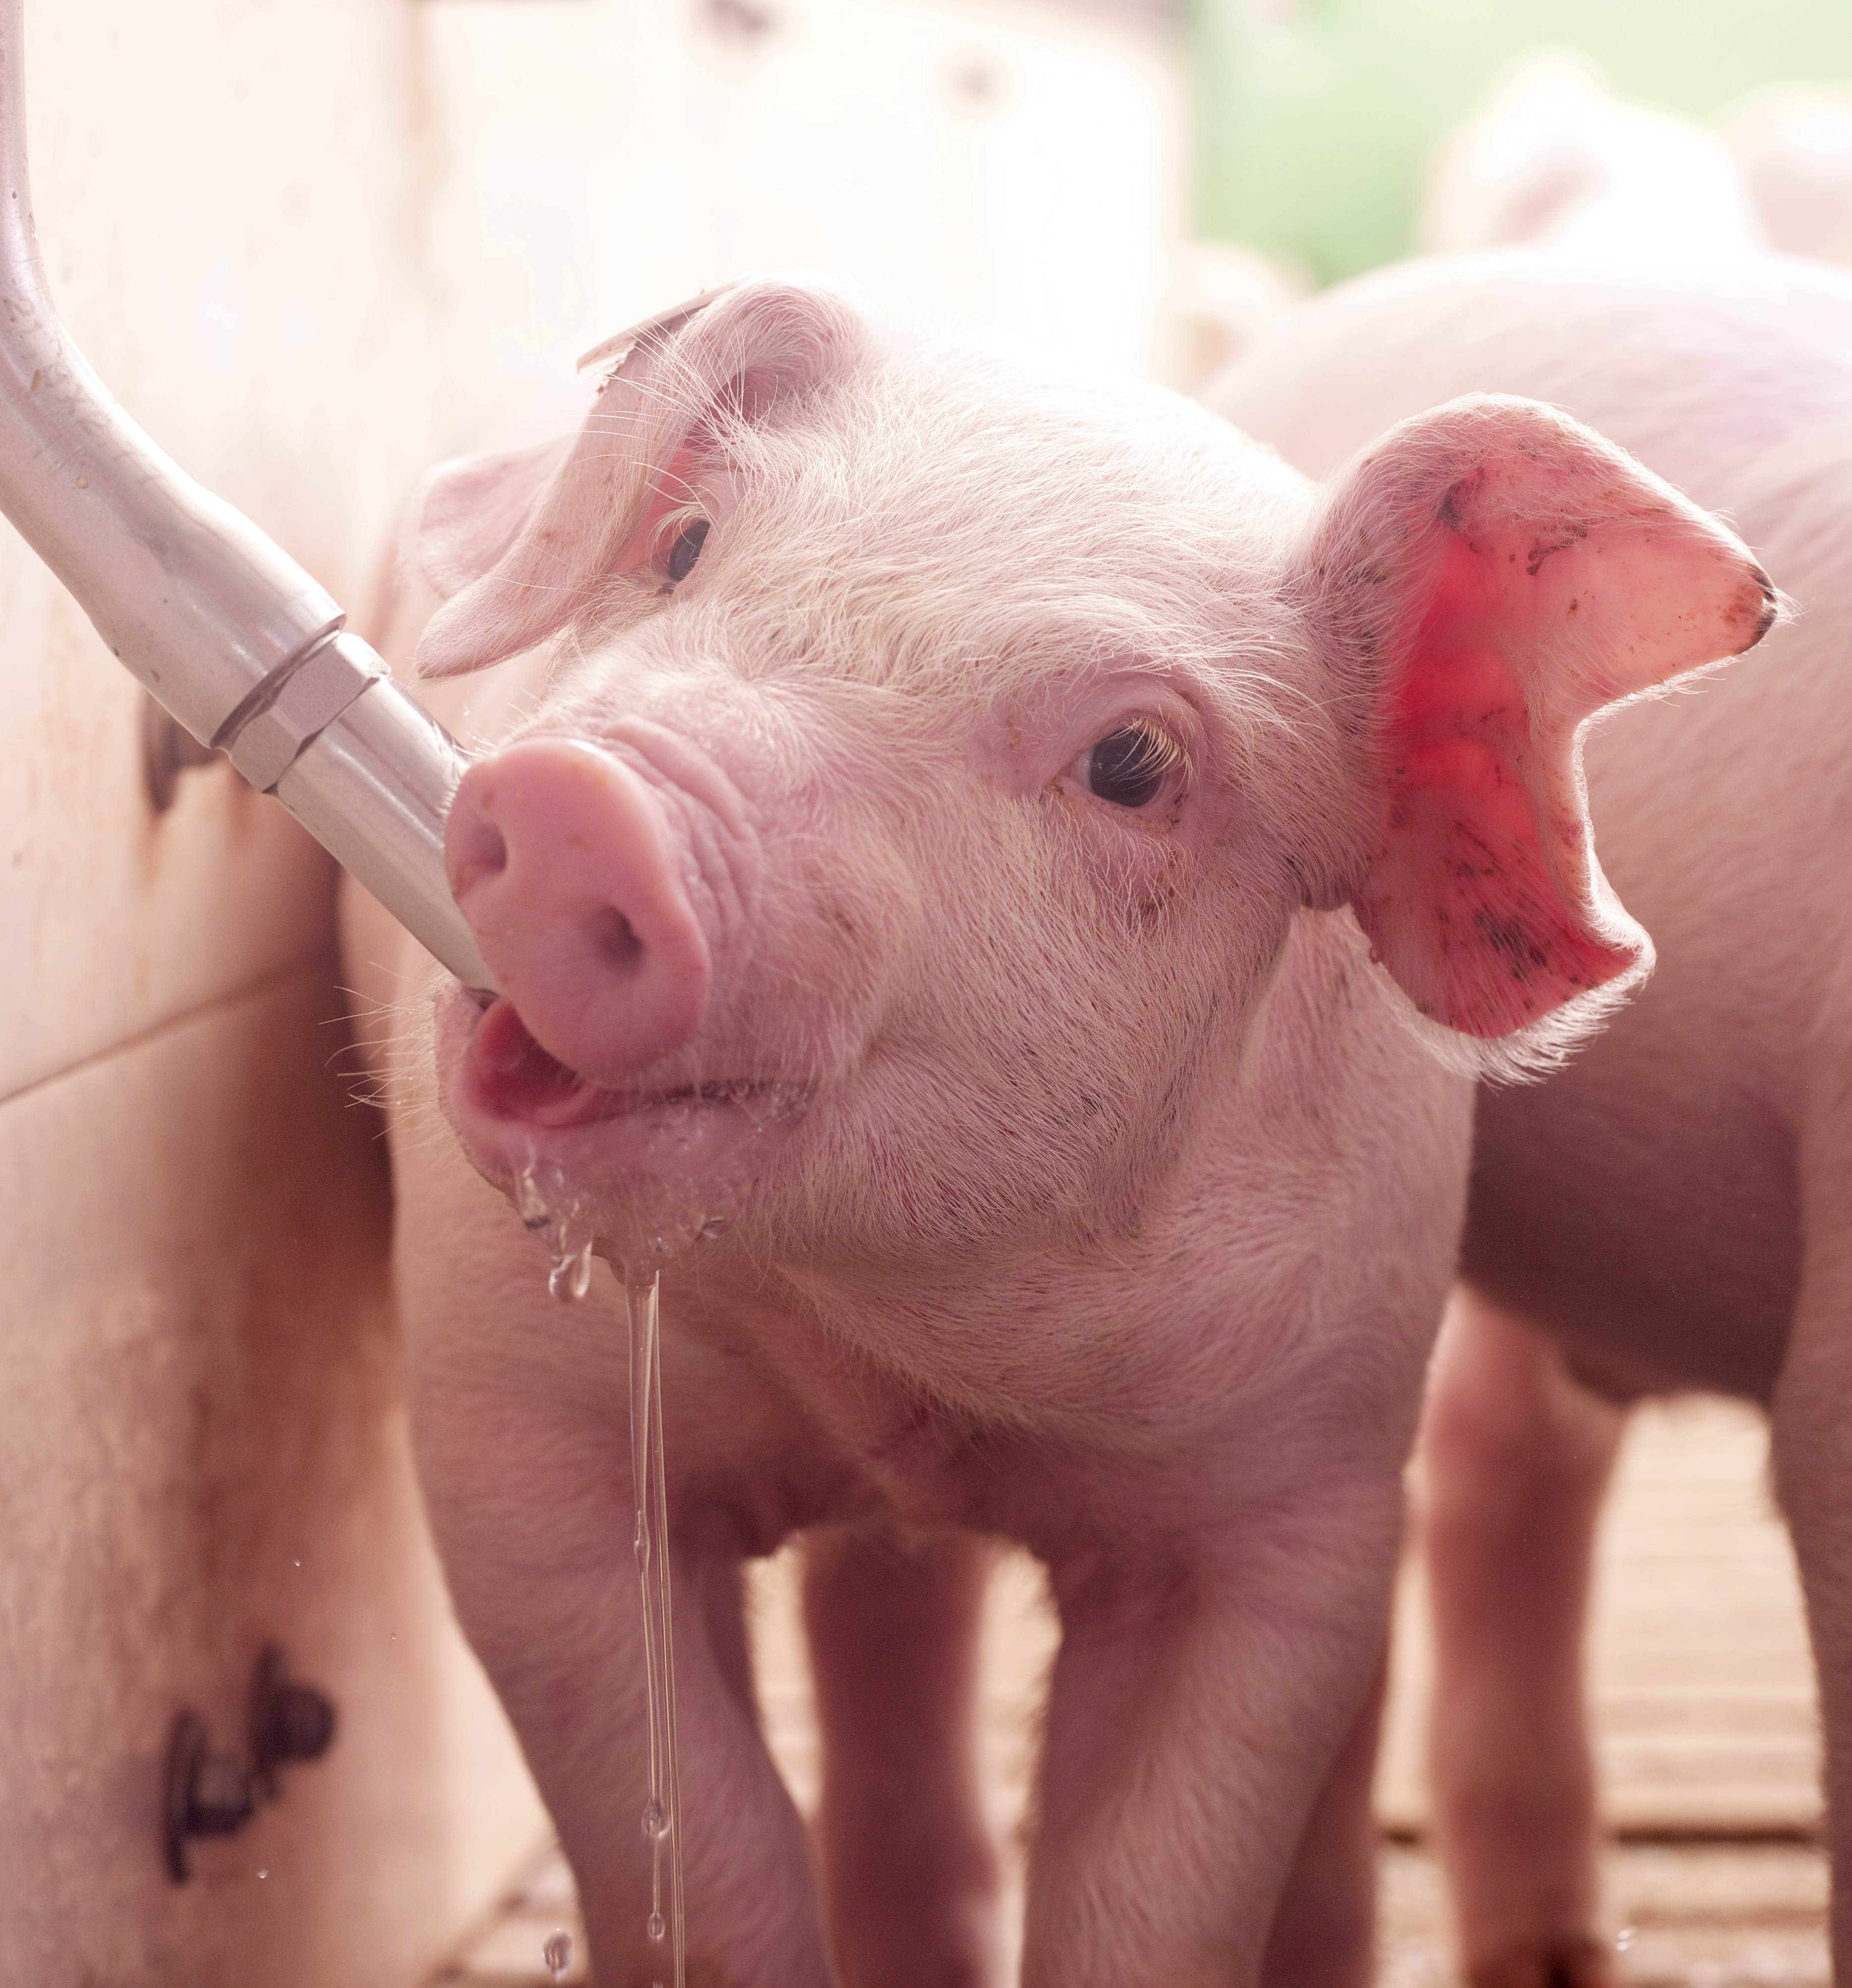 How do you get a pig to drink water?